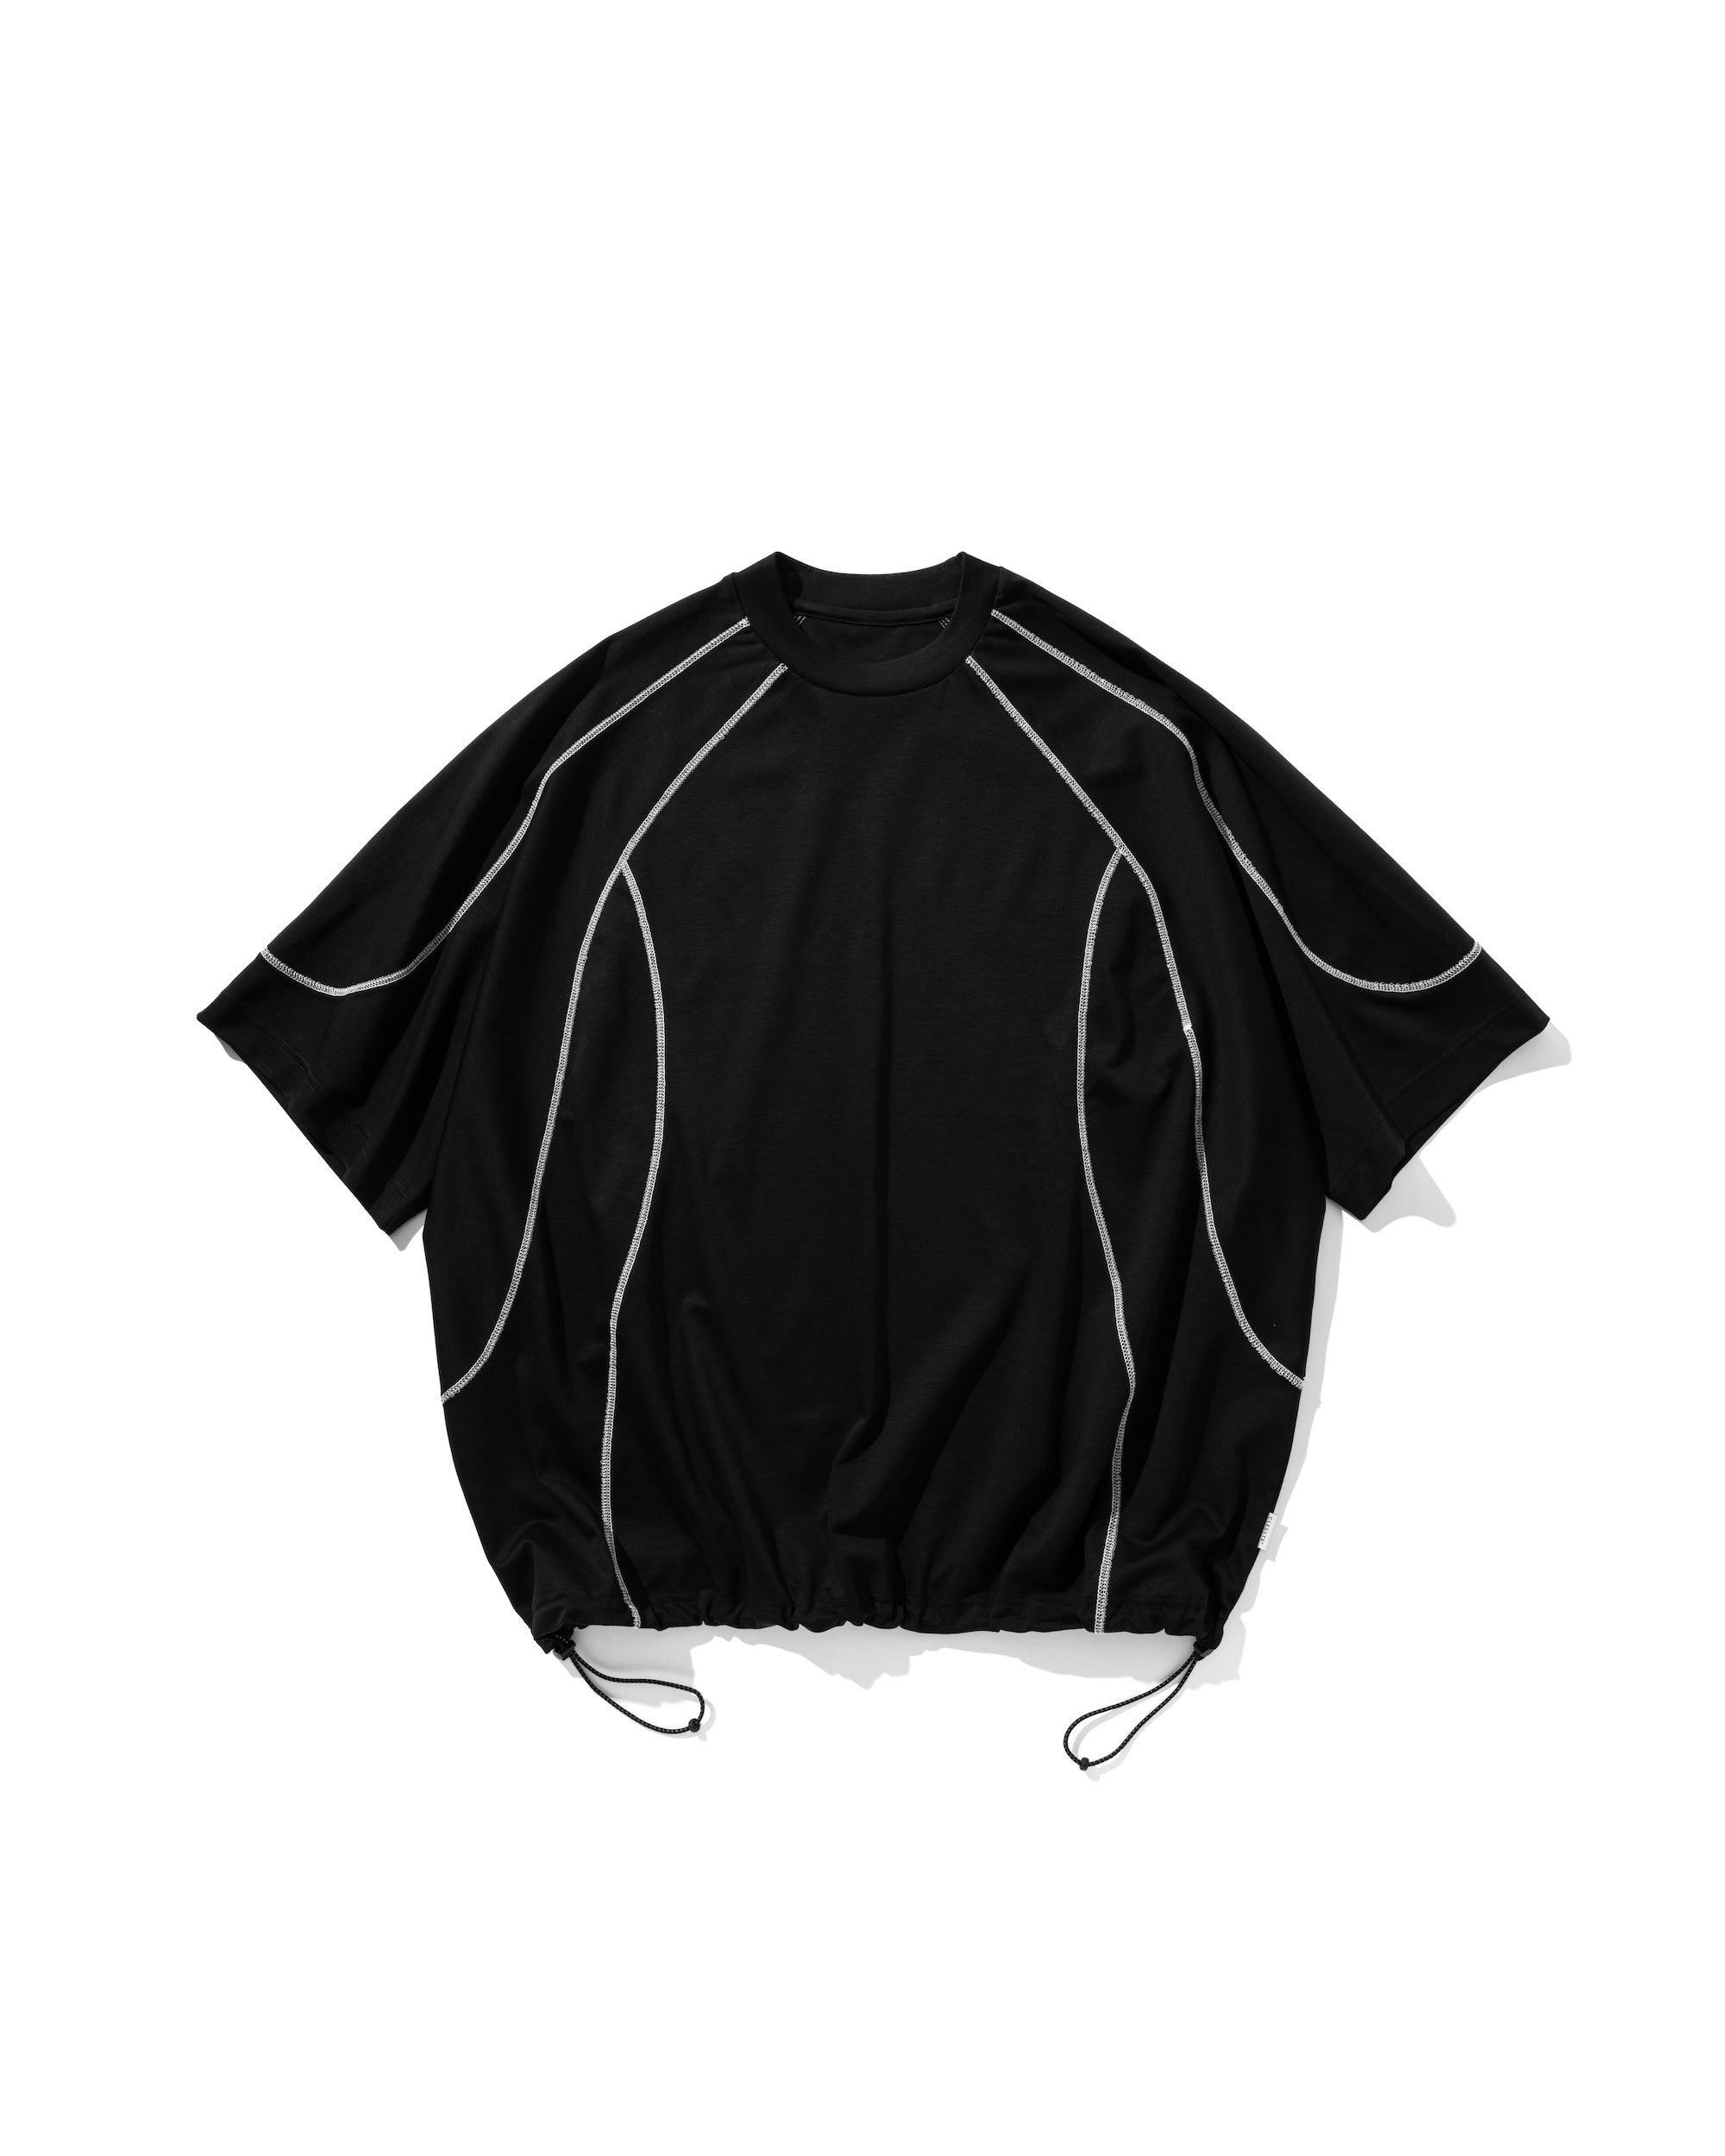 FUTURE T-SHIRT WITH DRAWSTRINGS